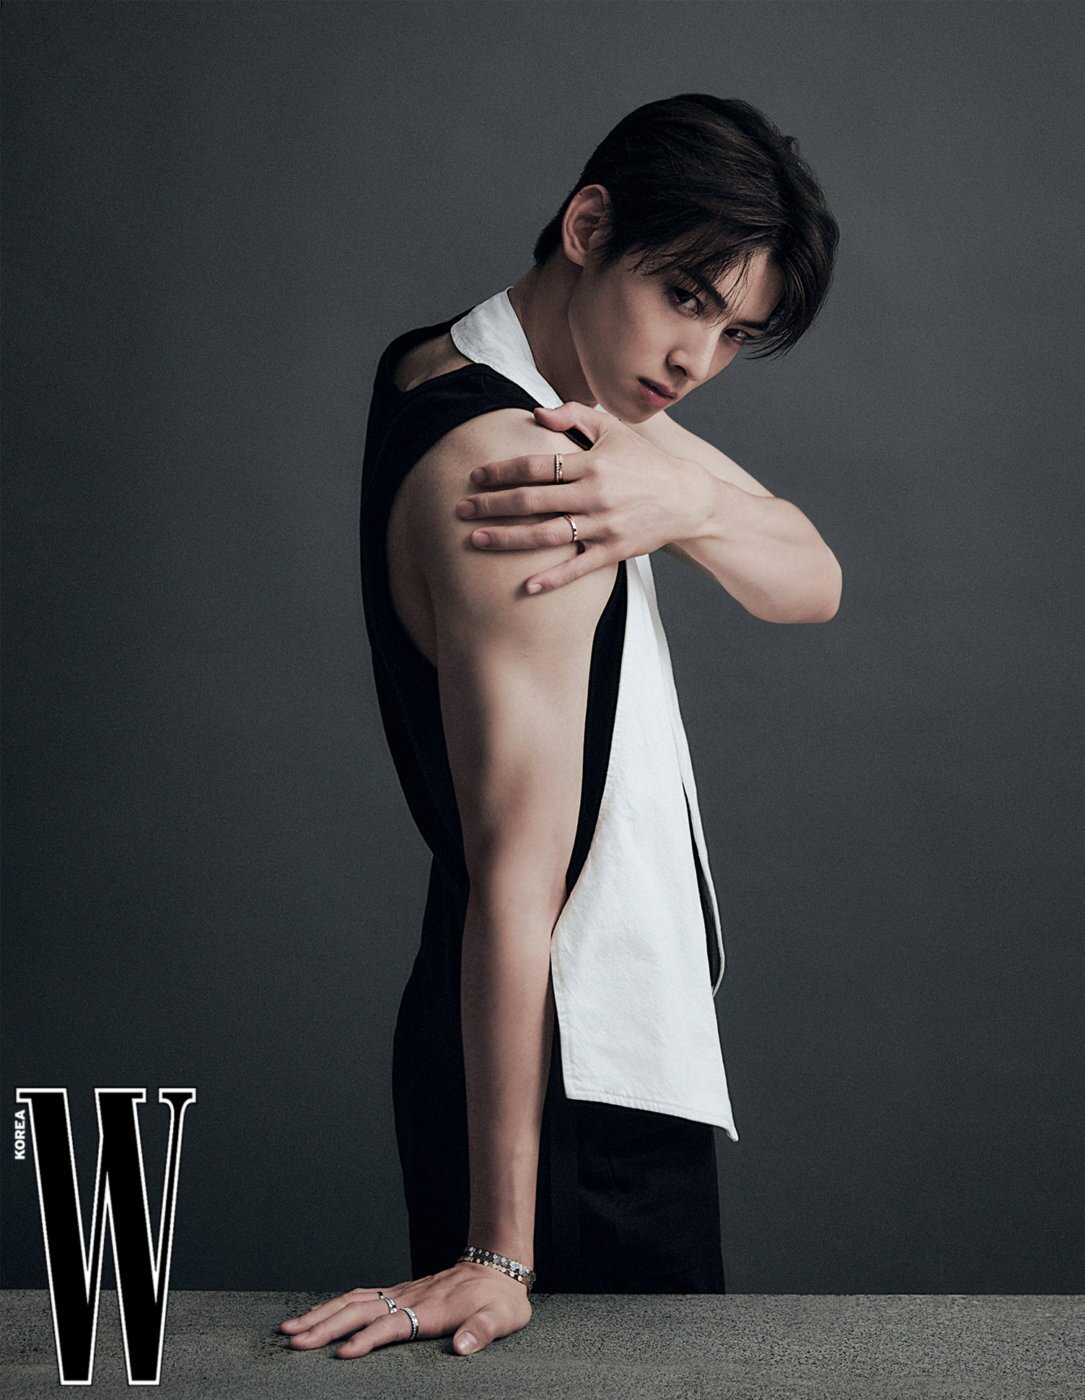 ASTRO's Cha Eun Woo turns heads with his fit physique in latest 'W Korea'  magazine photoshoot